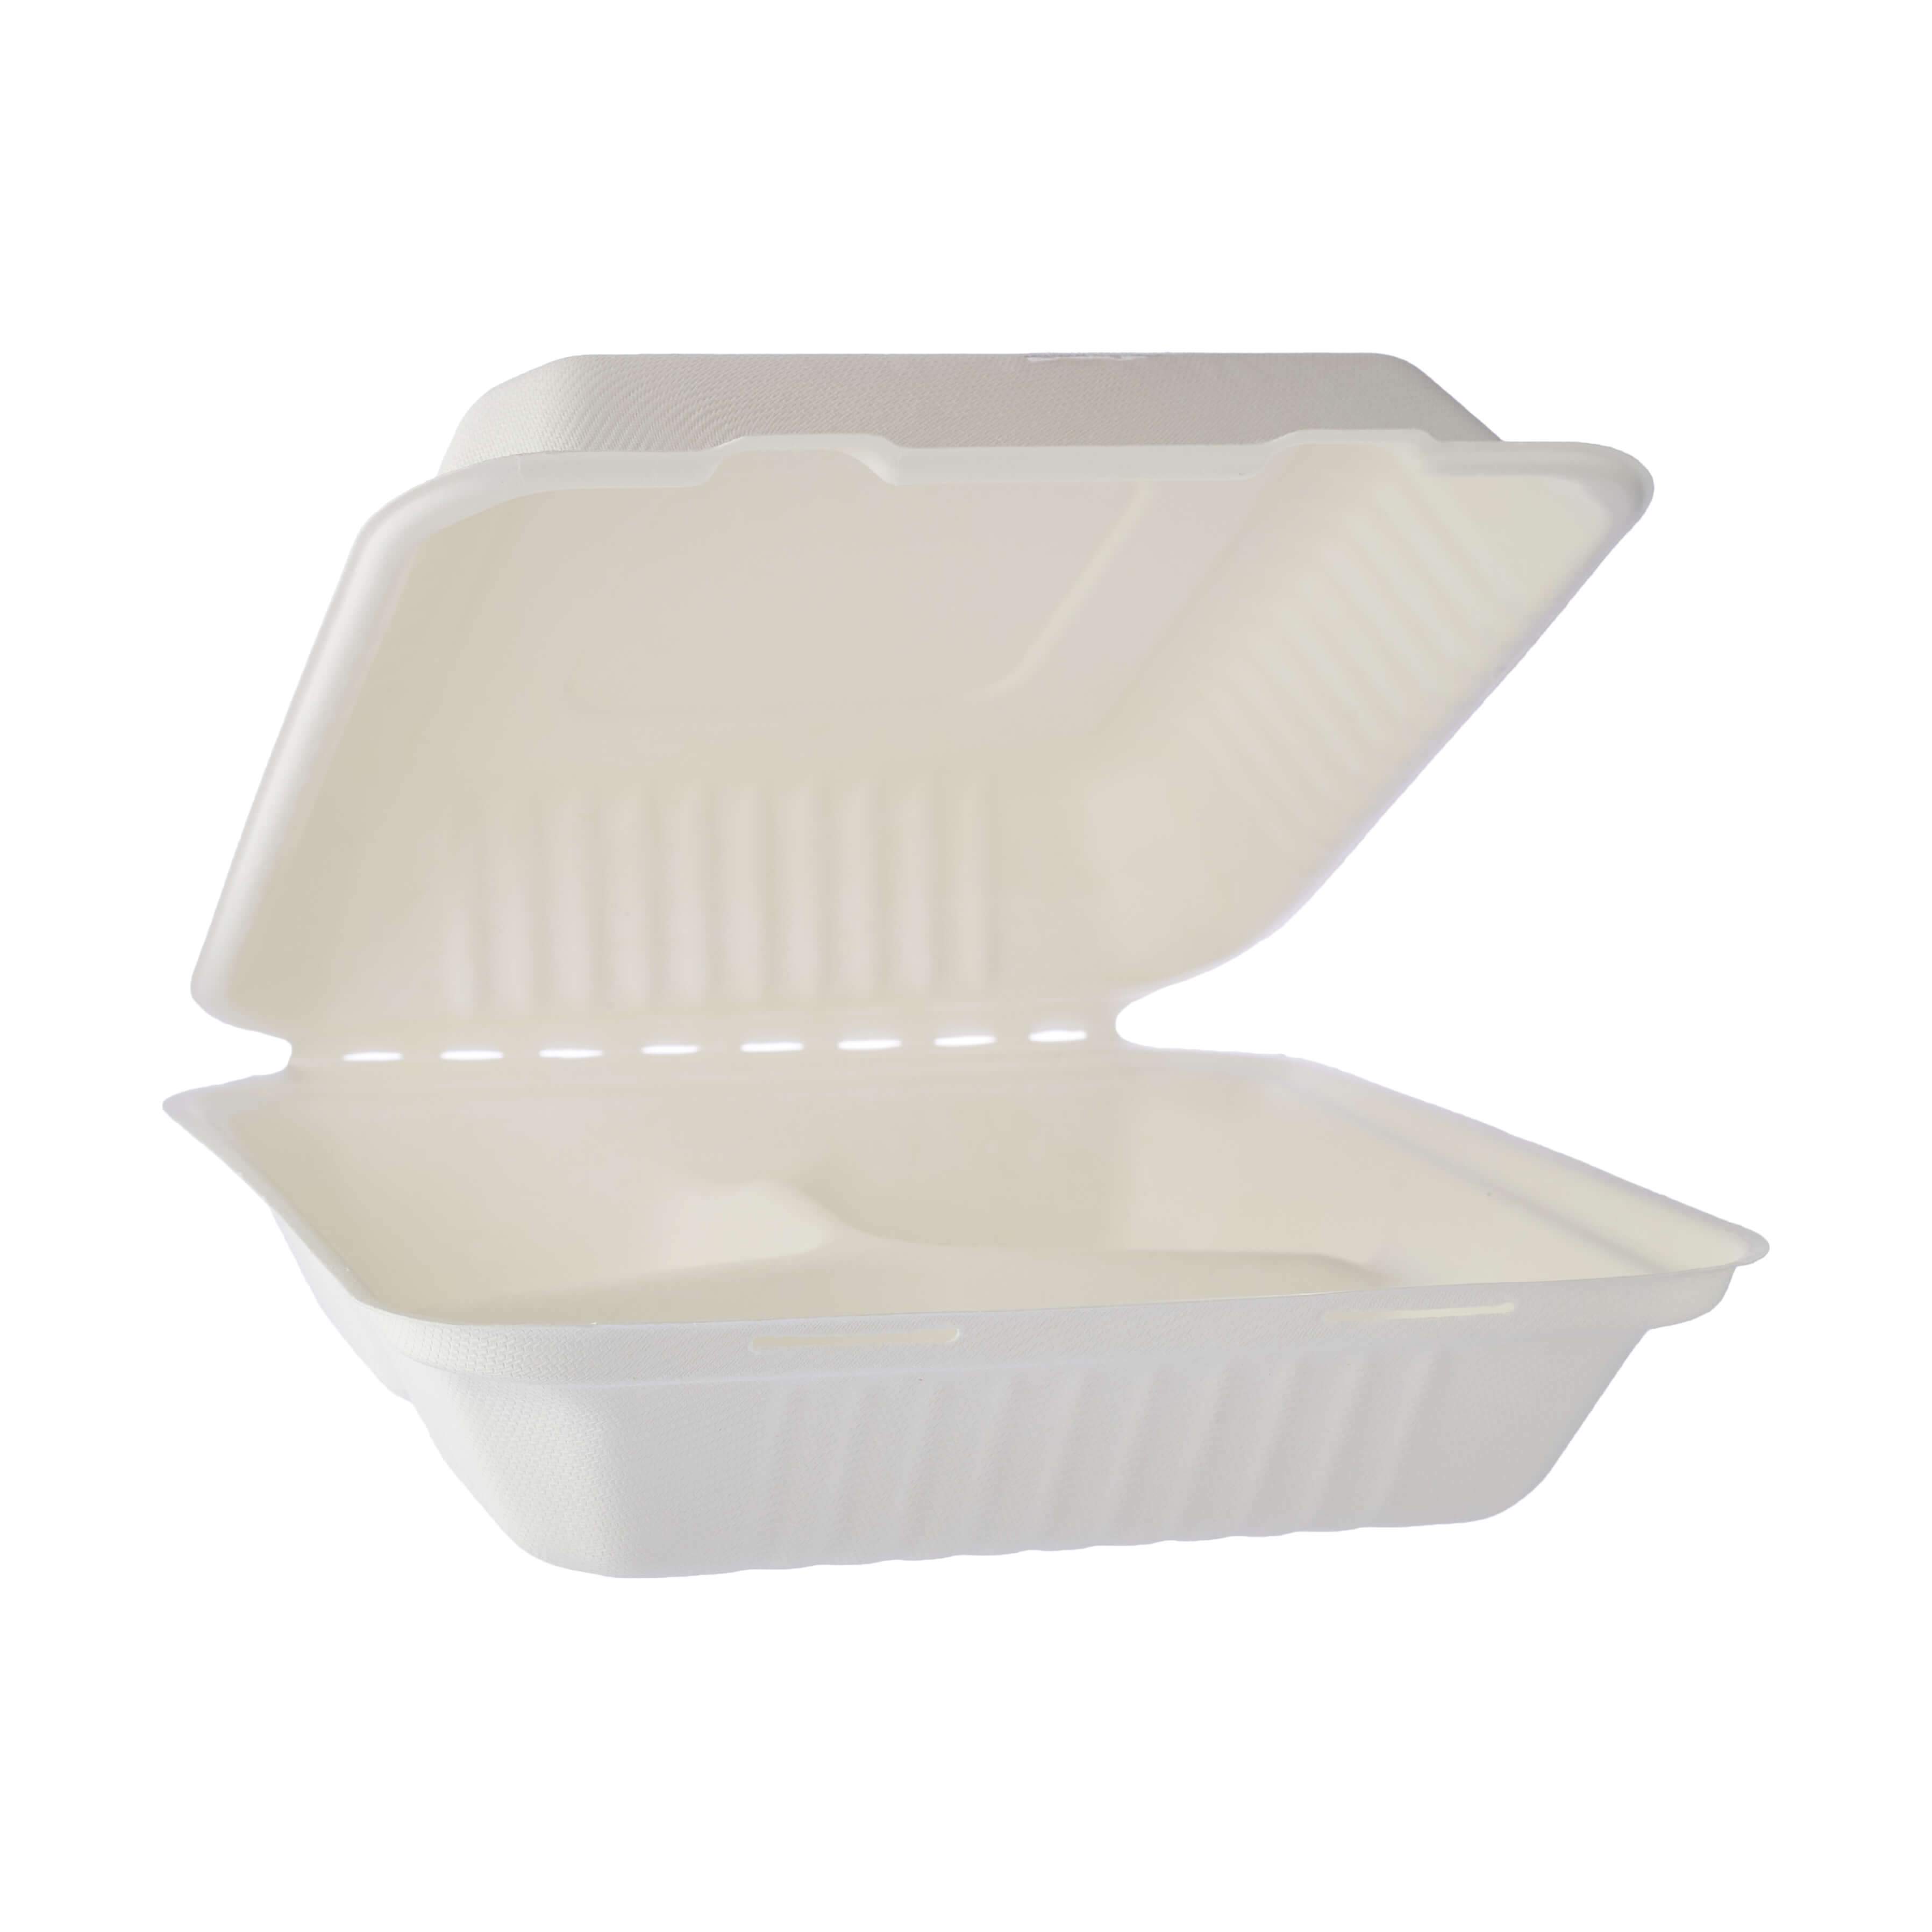 Bio degradable Lunch box in 3 compartment - 200 Pcs - Hotpack Oman